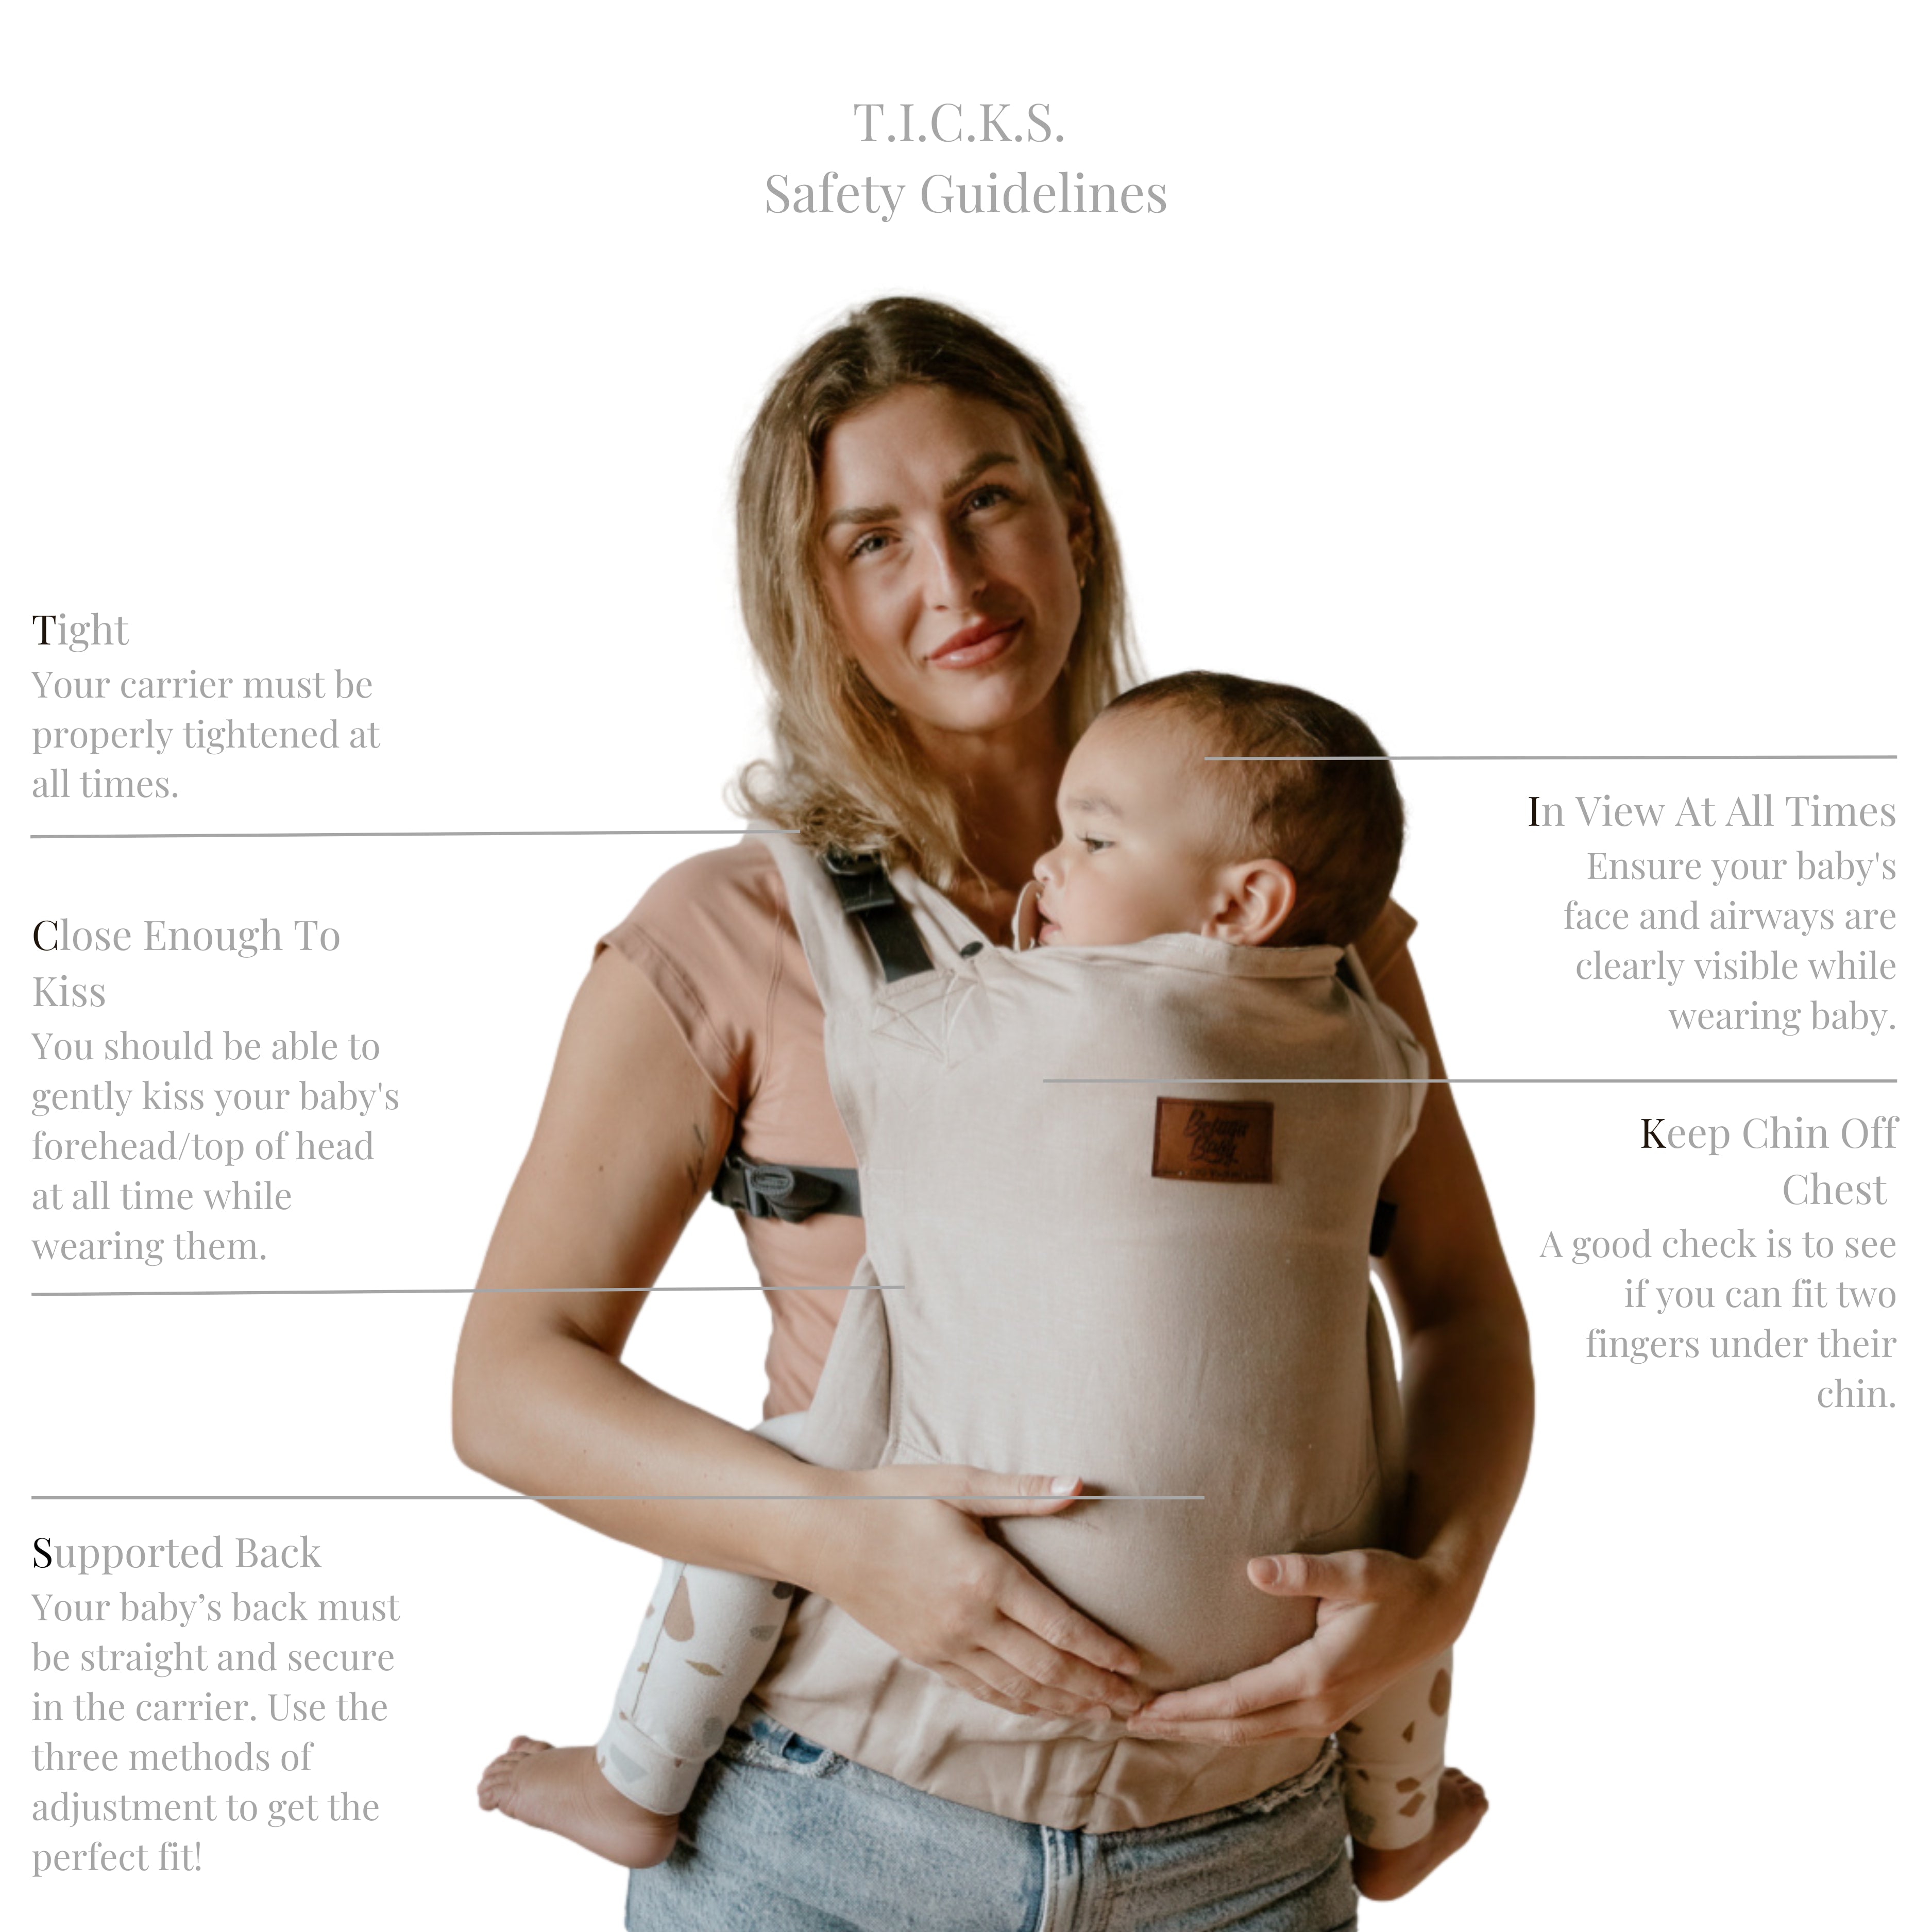 How to tighten the straps on your baby buckle carrier 